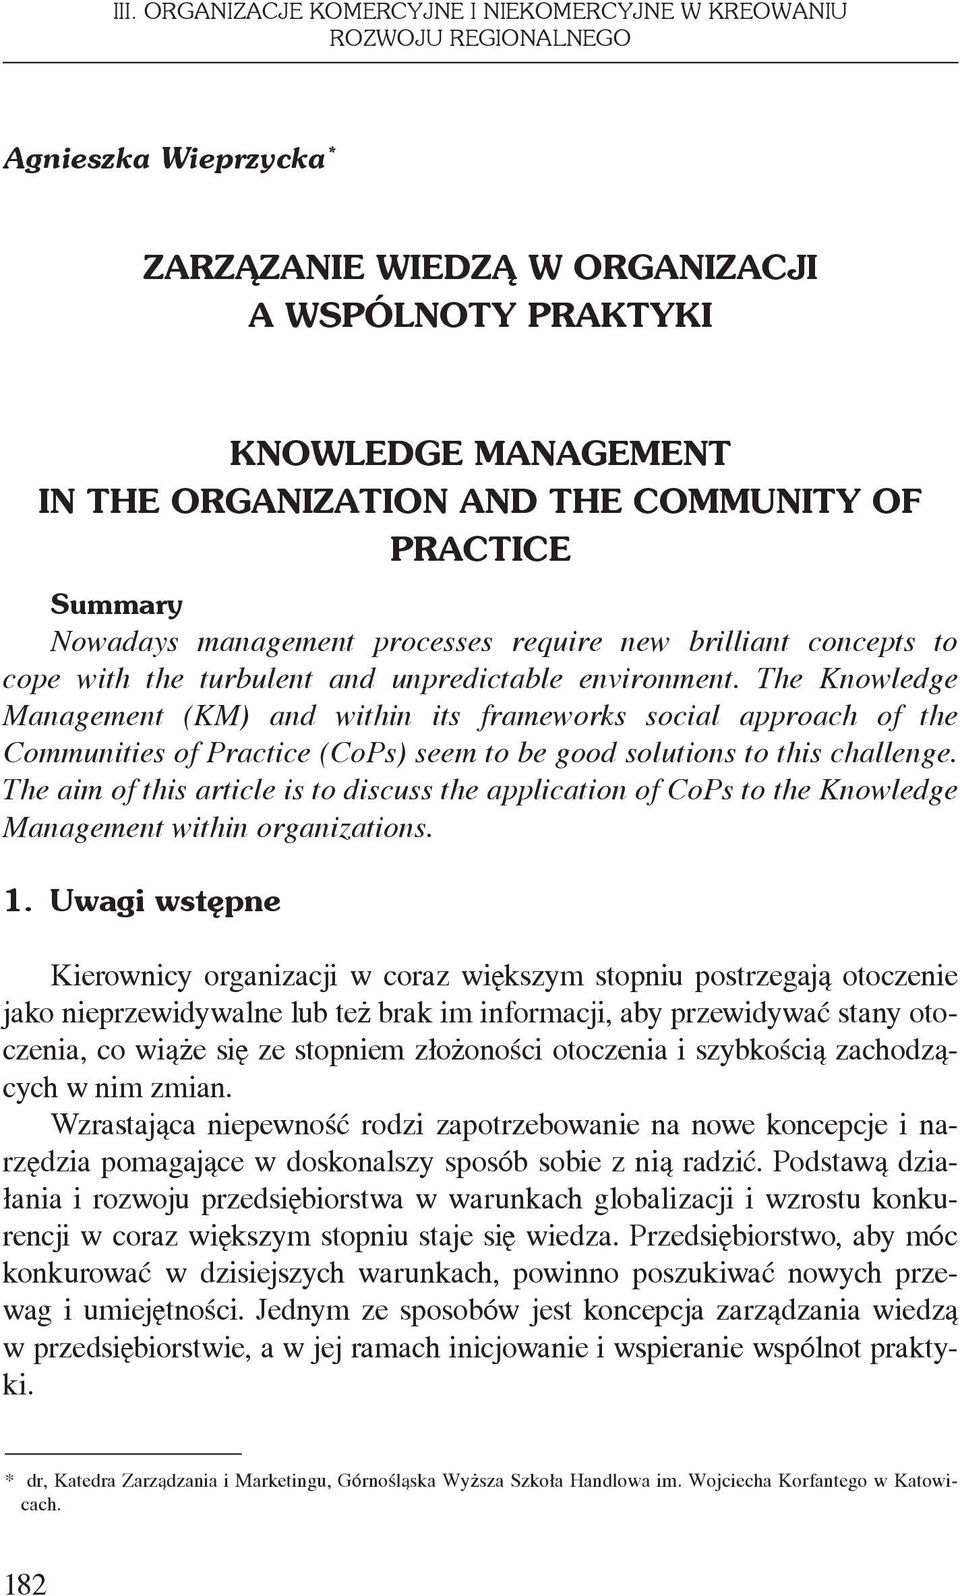 The Knowledge Management (KM) and within its frameworks social approach of the Communities of Practice (CoPs) seem to be good solutions to this challenge.